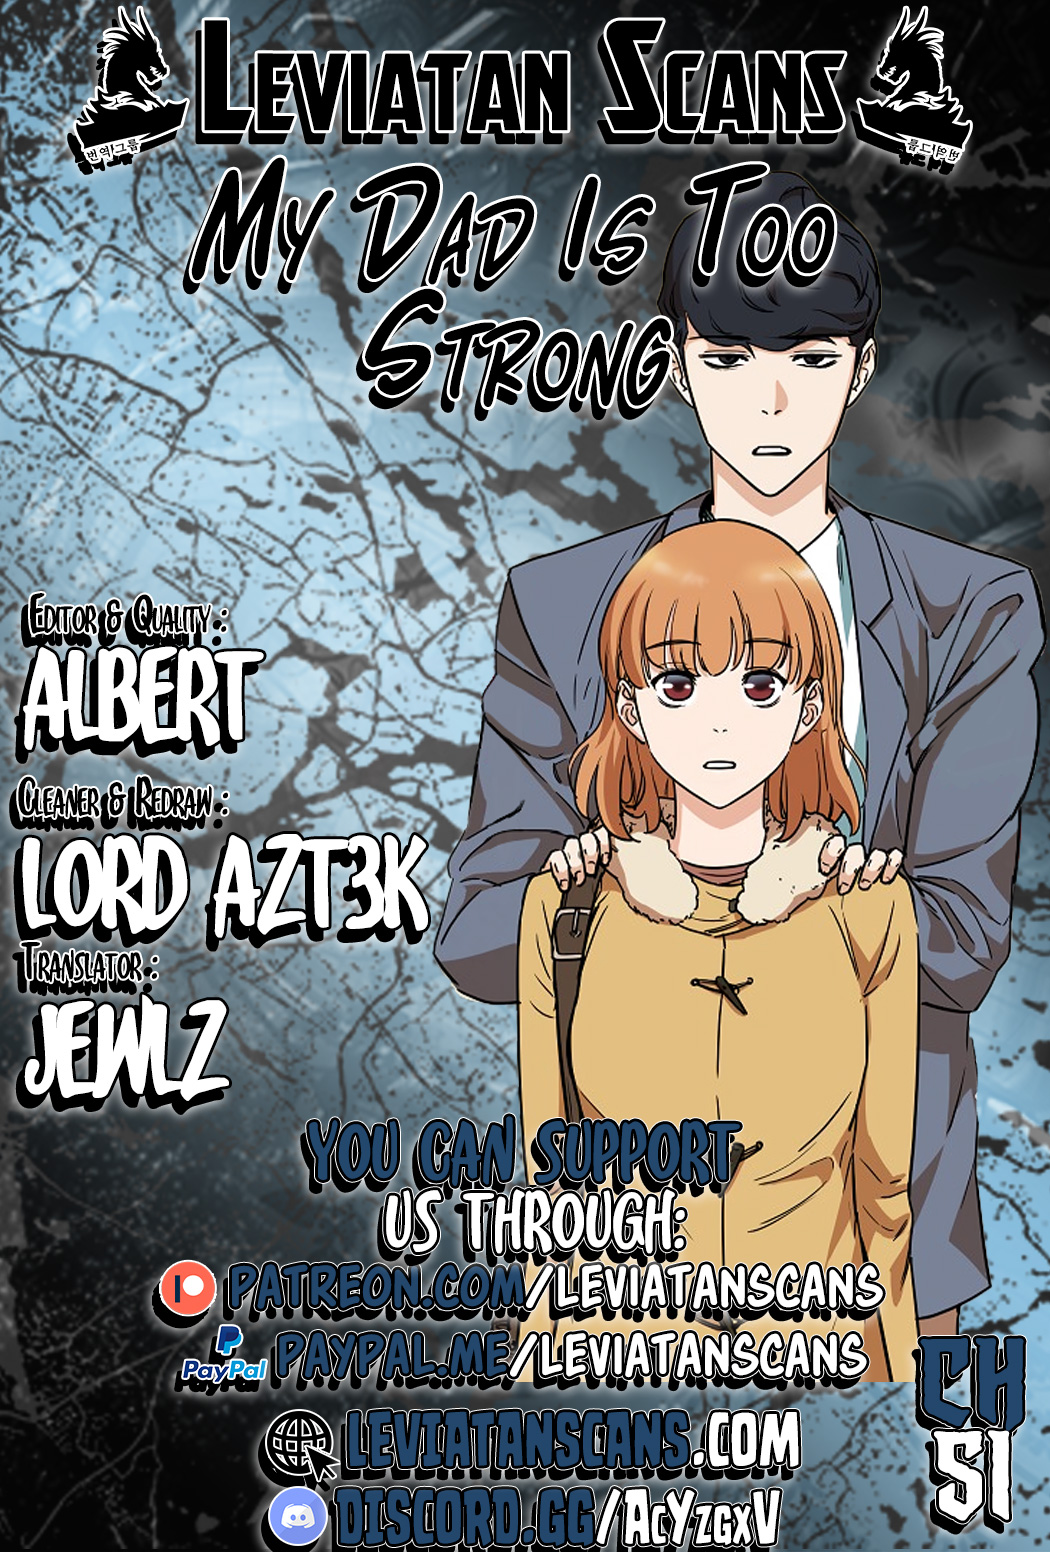 My Dad is Too Strong - Chapter 2631 - Image 1